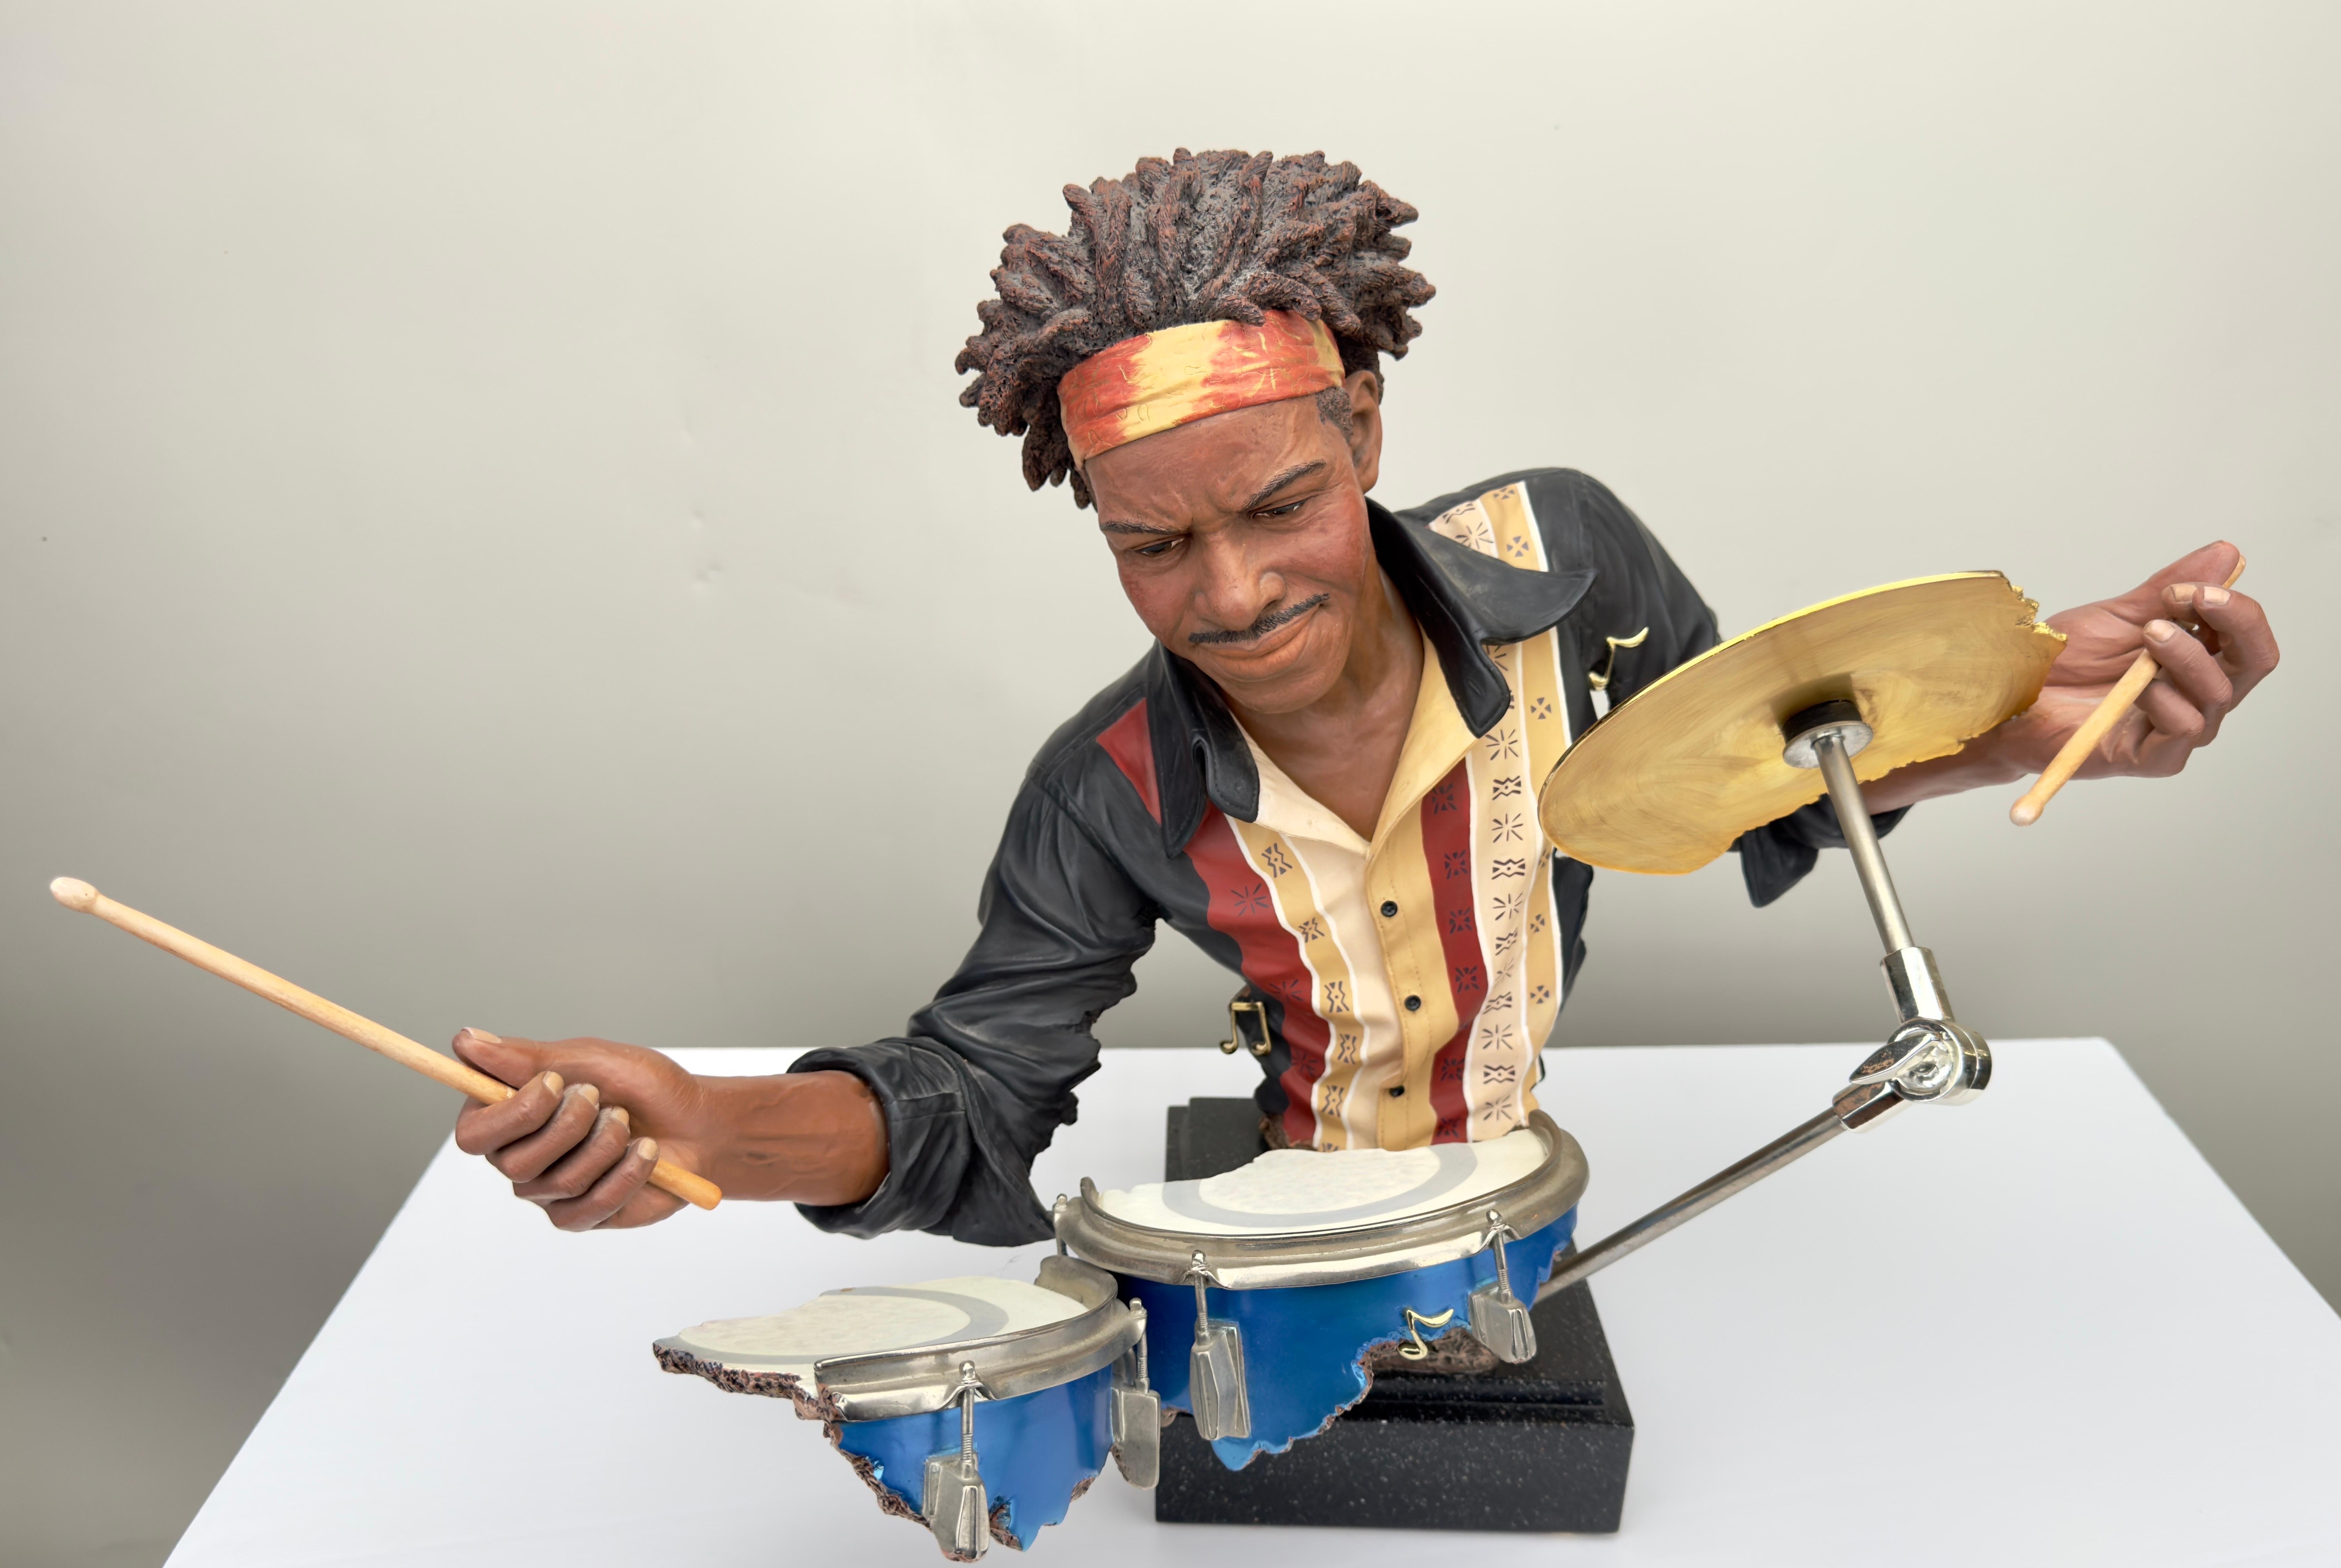 An exceptional drummer  sculpture by Willitts Designs International and Shen Lung. The sculpture is cold painted and made of hand cast resin. The drummer sculpture shows an african American man wearing a striped shirt and a bandana and is immersed